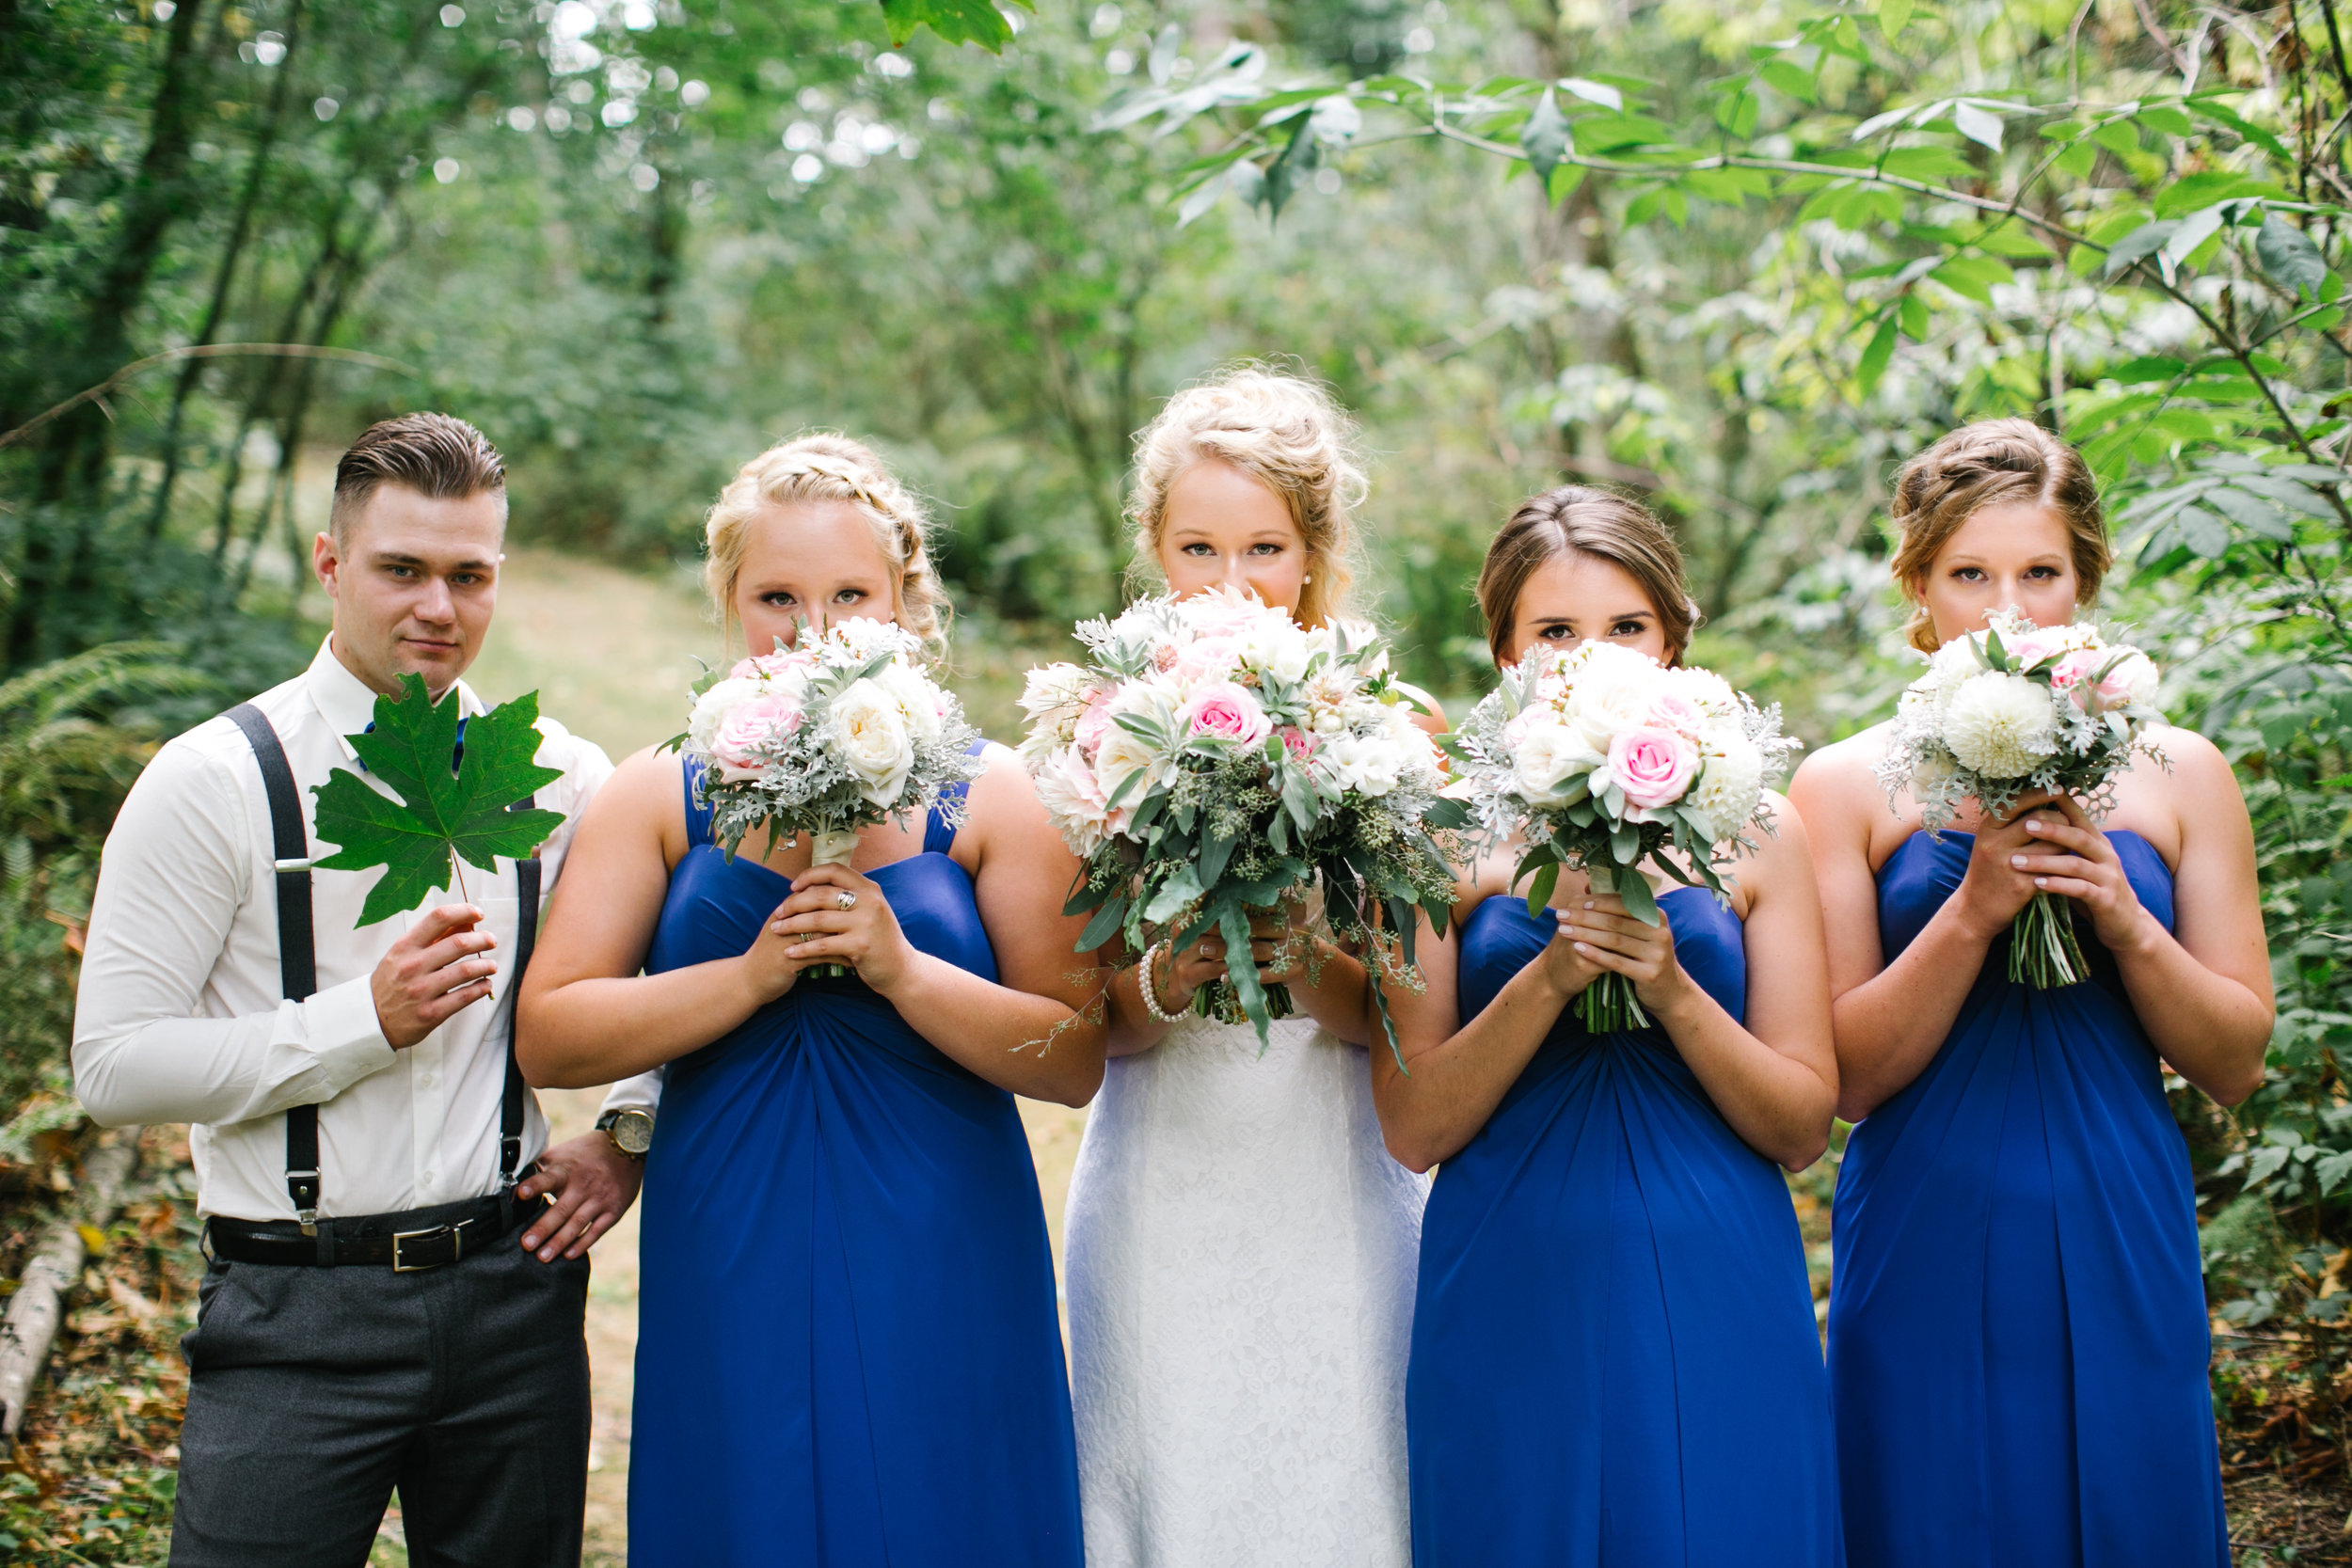  Bridesmaids with their summer bouquets, by Abbotsford wedding florist, Floral Design by Lili 